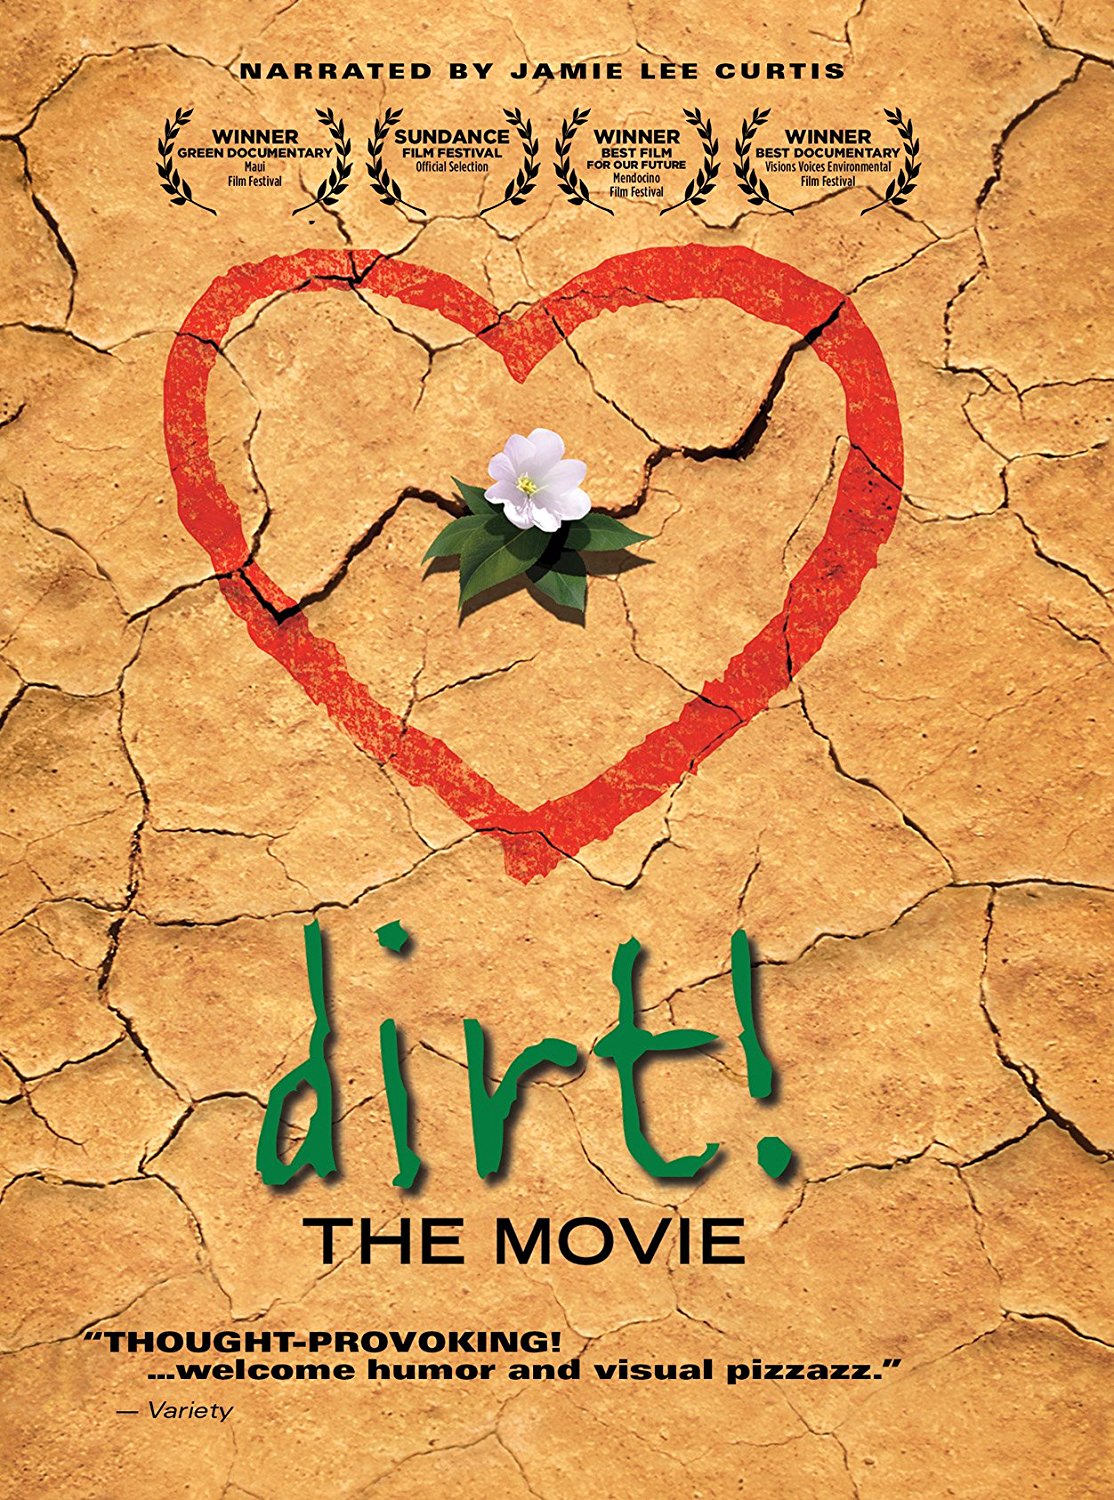 ‘DIRT! THE MOVIE’ – A LAST MINUTE CHRISTMAS GIFT